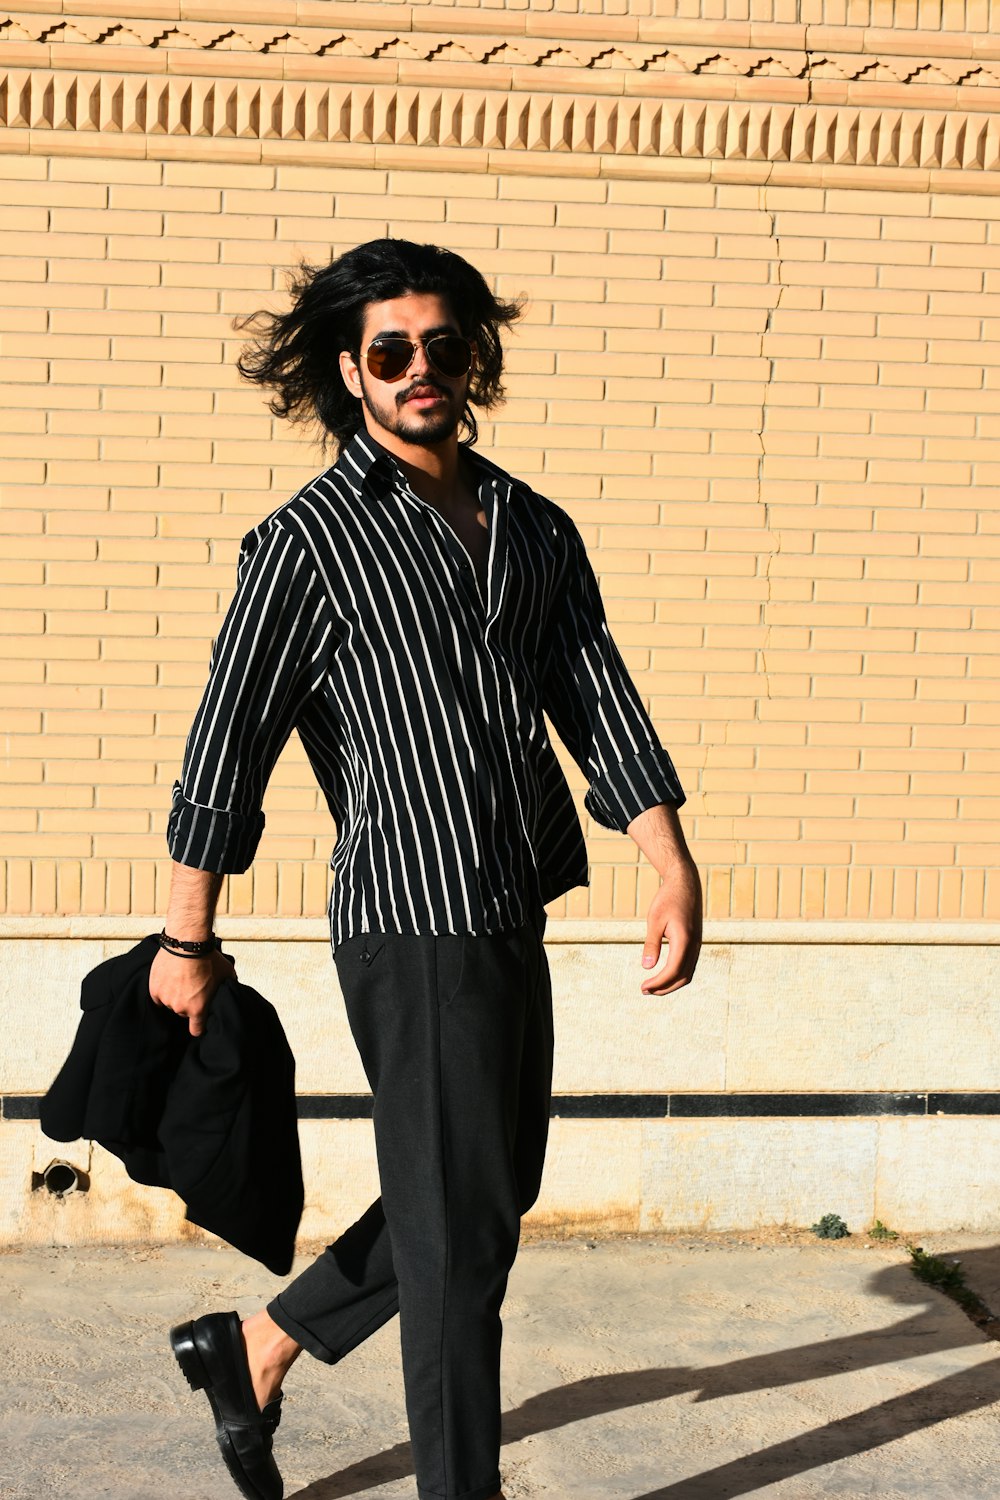 a man with long hair and sunglasses walking down the street